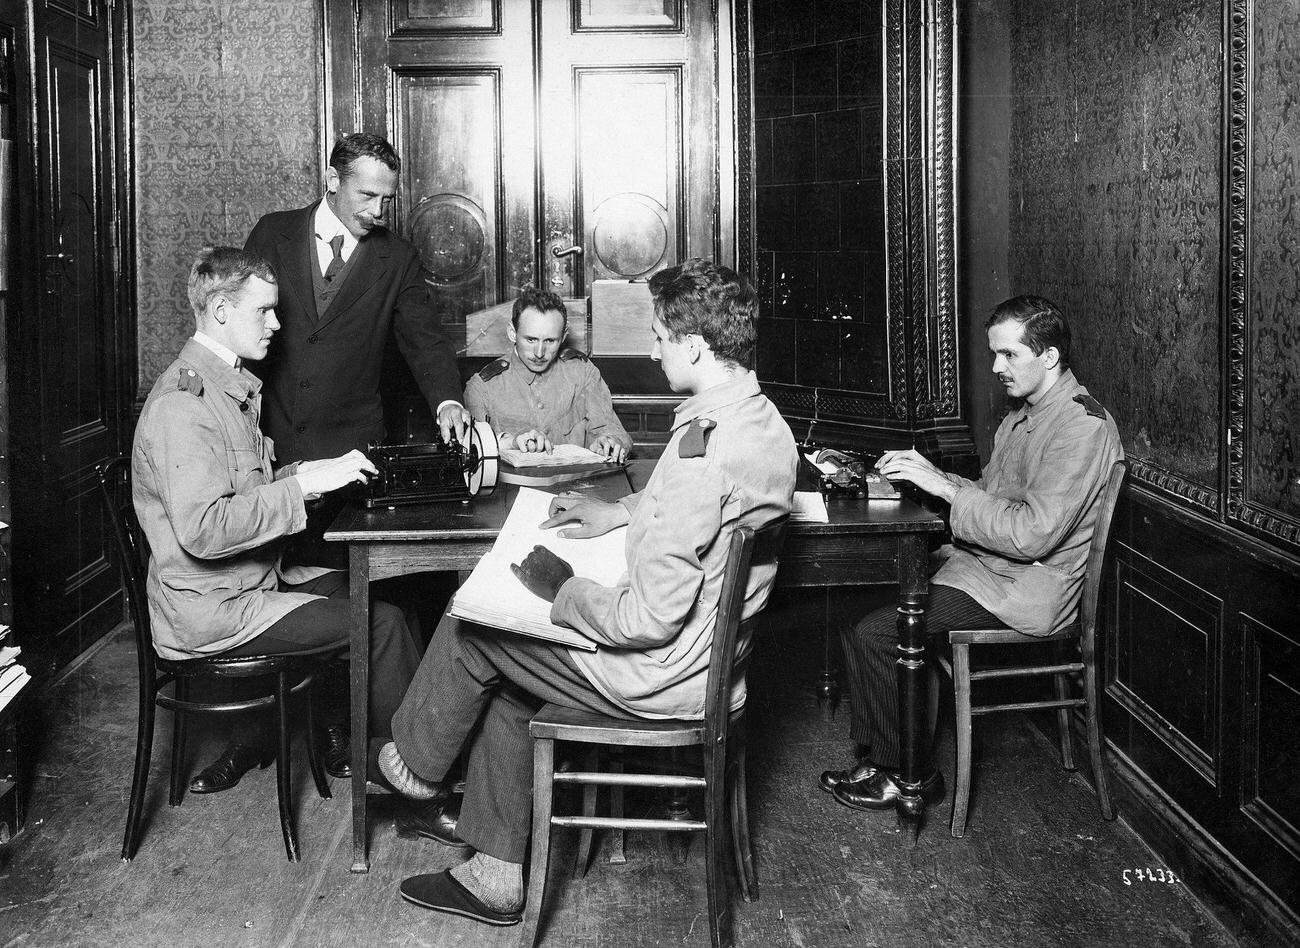 Blind teacher with blind pupils learning braille and typing, 1917.